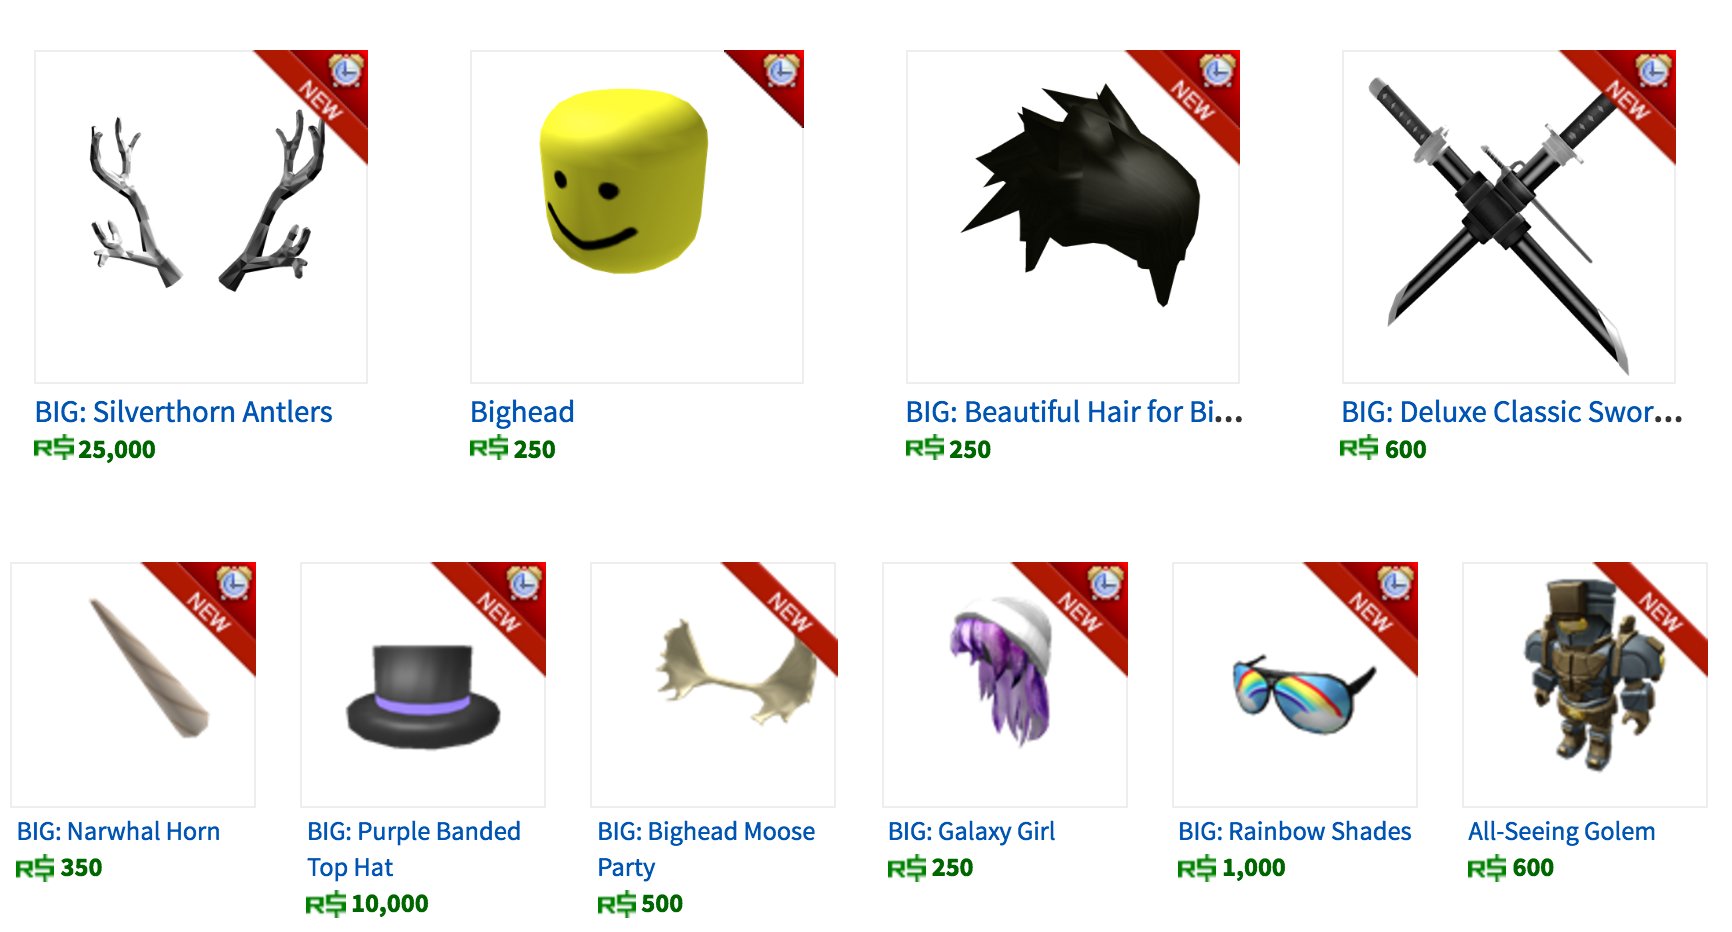 Roblox On Twitter Make Your Bighead Even More Stylish With These Special Items Designed To Fit Https T Co Rpc9glug6g - roblox bighead hair